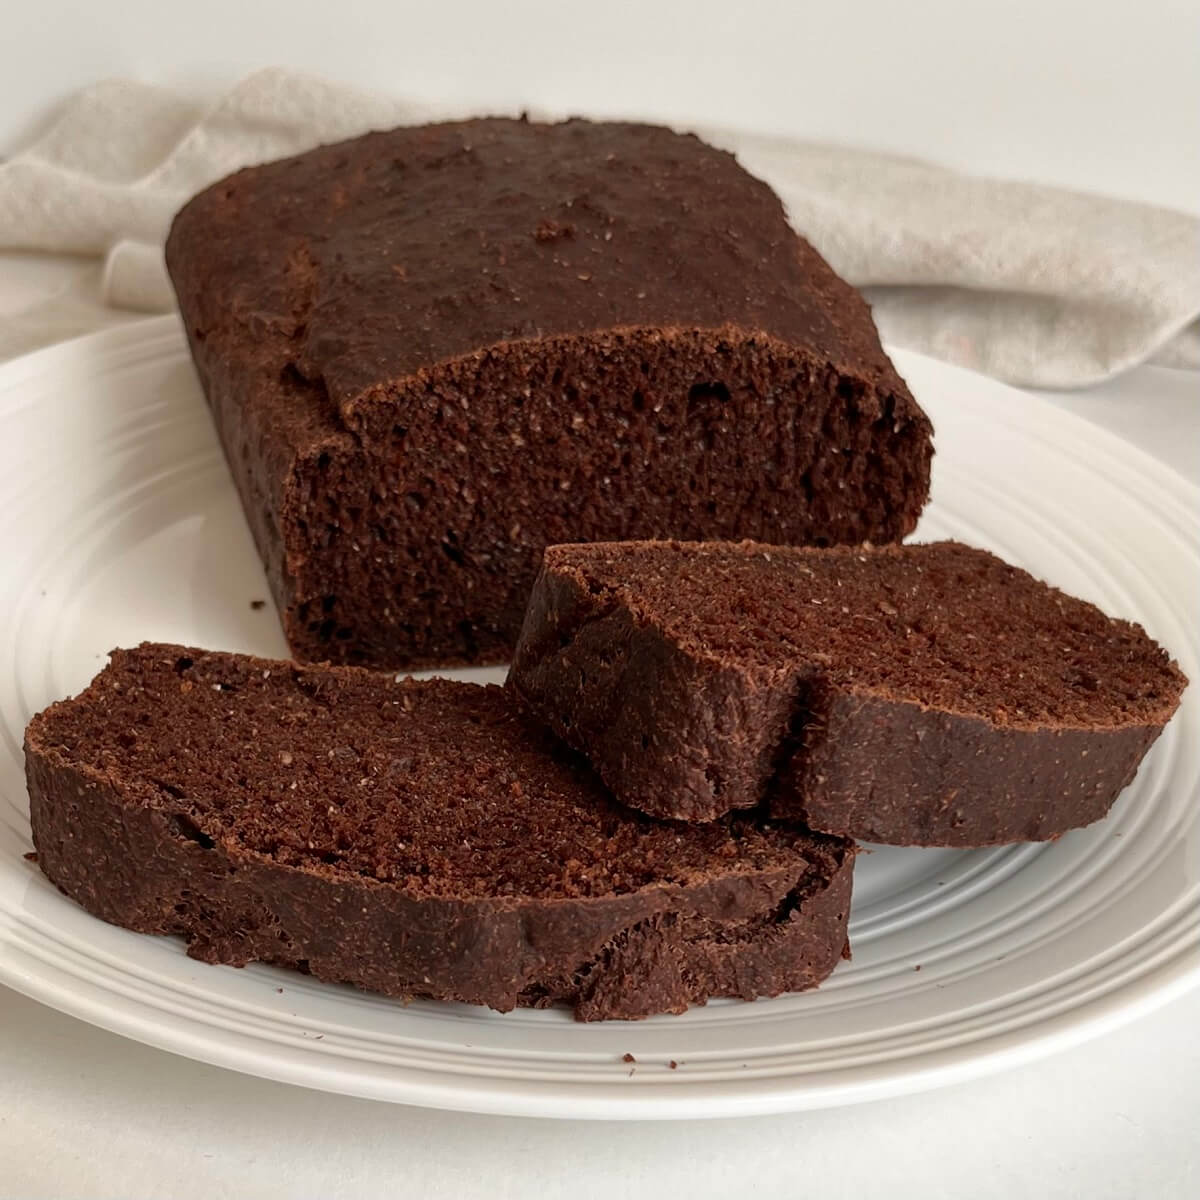 Chocolate loaf bread with two thick slices cut.